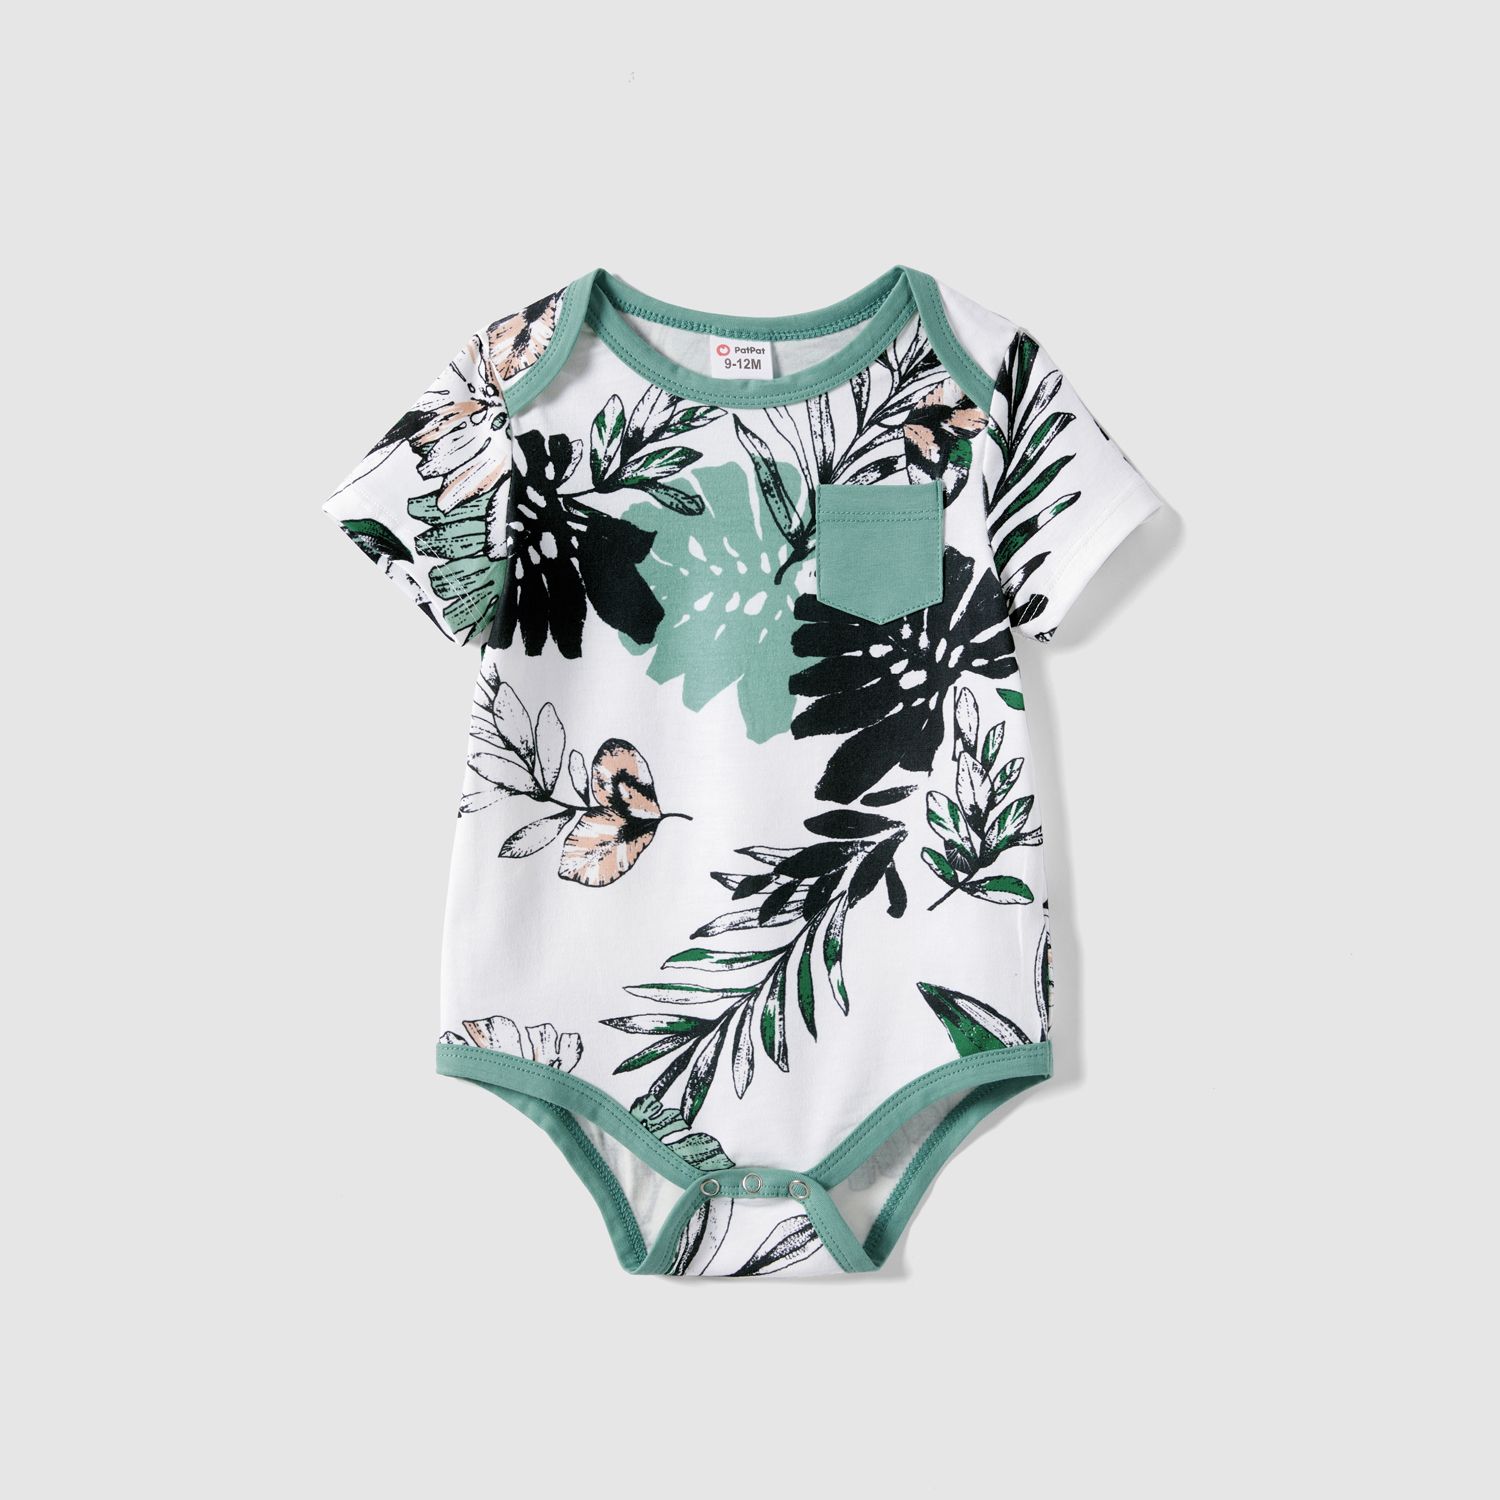 Family Matching Plant Print Belted Slip Dresses And Tank Top Sets